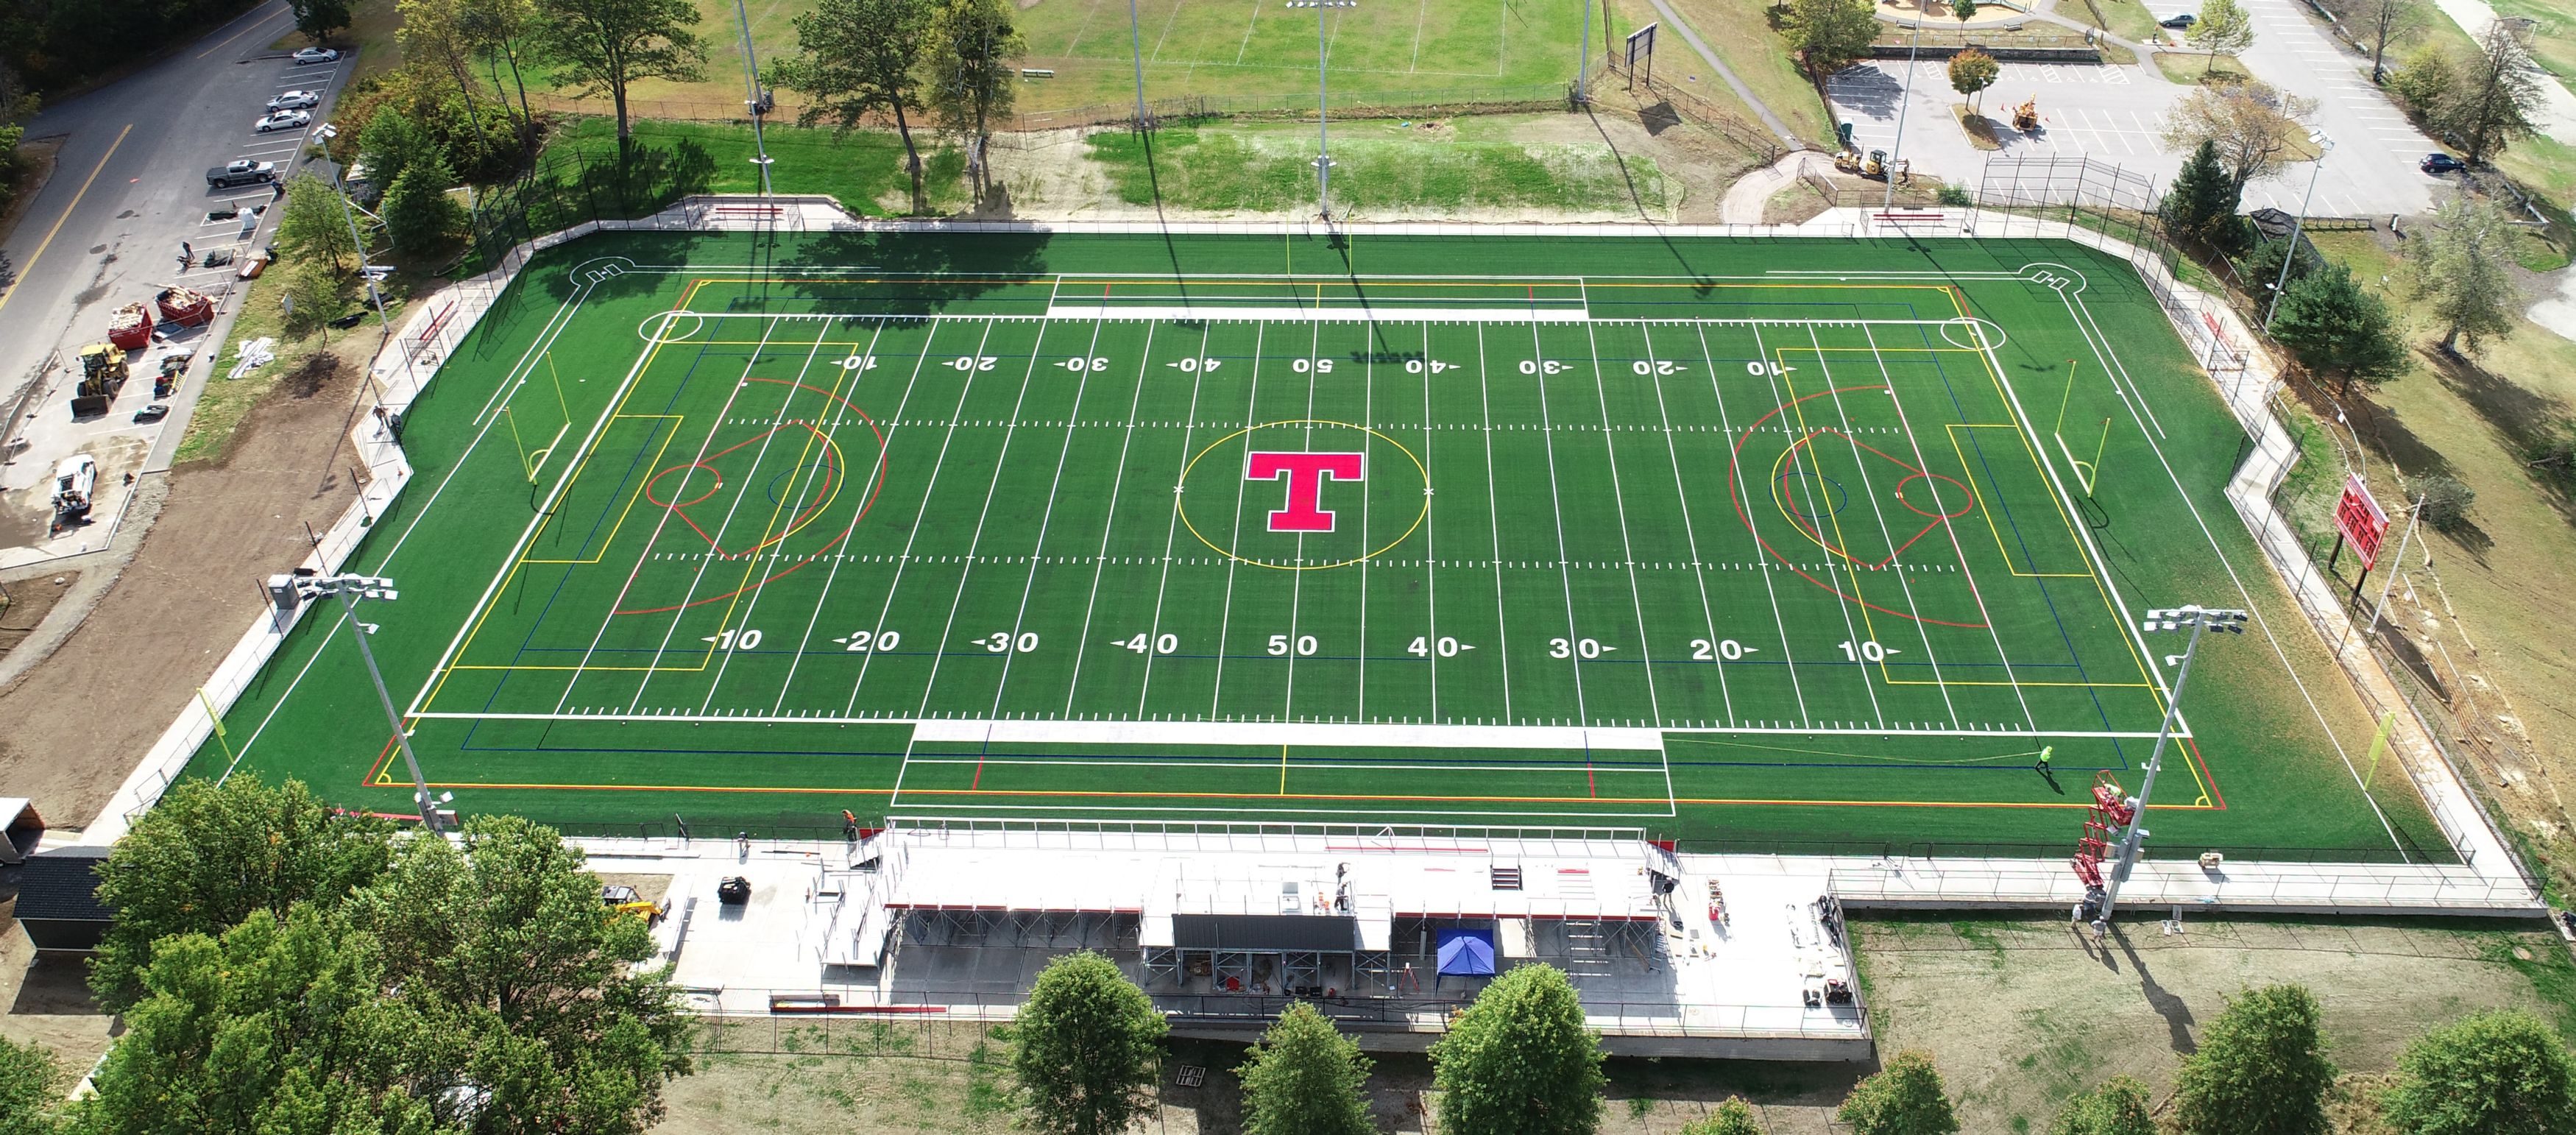 https://www.trinity-hs.org/editoruploads/images/Construction/Aerial%20view%20of%20field%20cropped.jpg